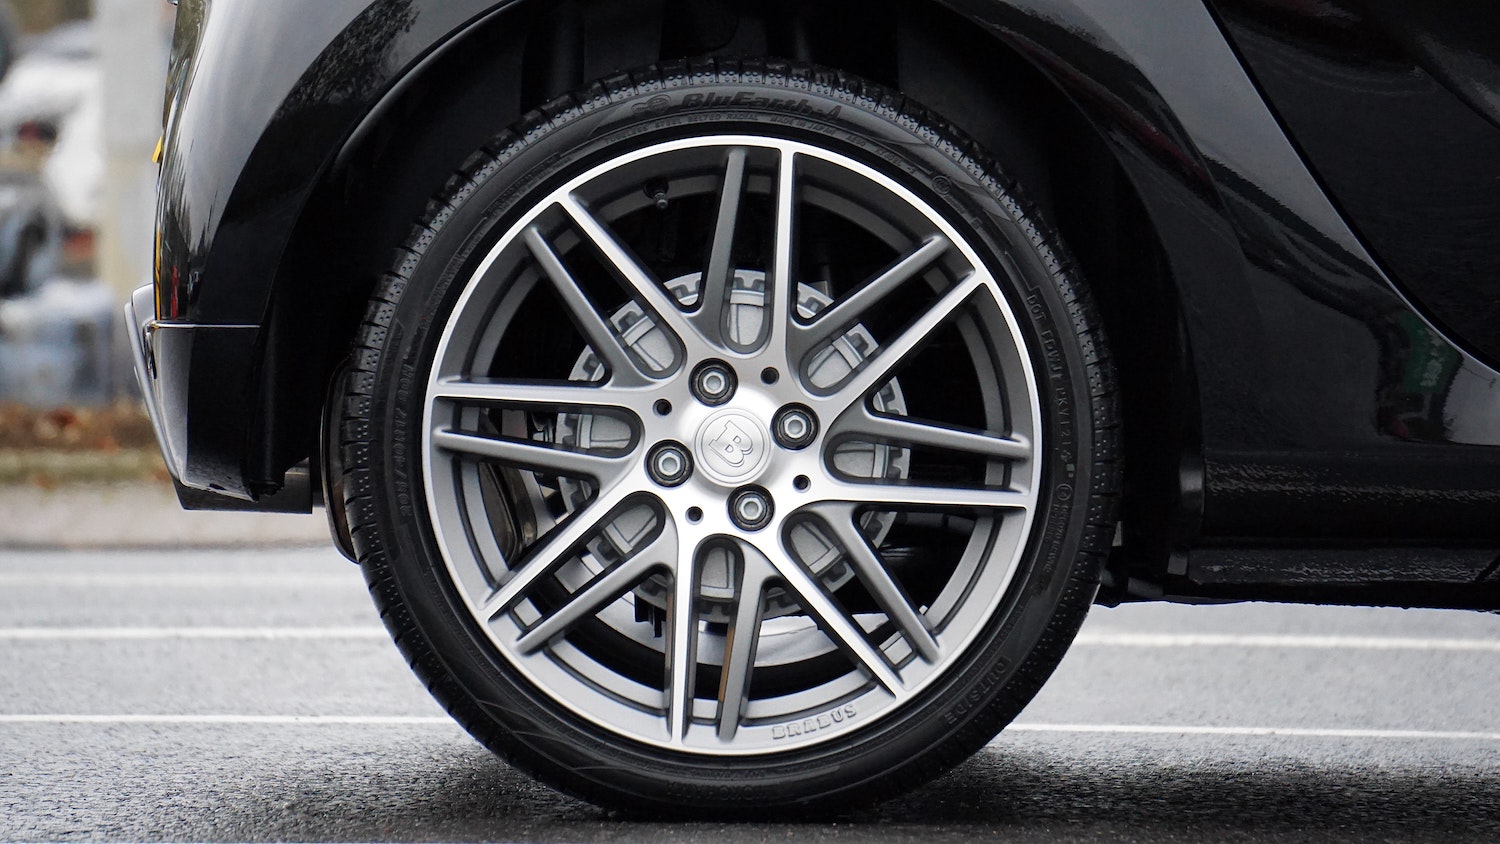 ExoForma, Car Guys, and more: Shop the best tire shines to get your car's  kicks looking like new again - The Manual